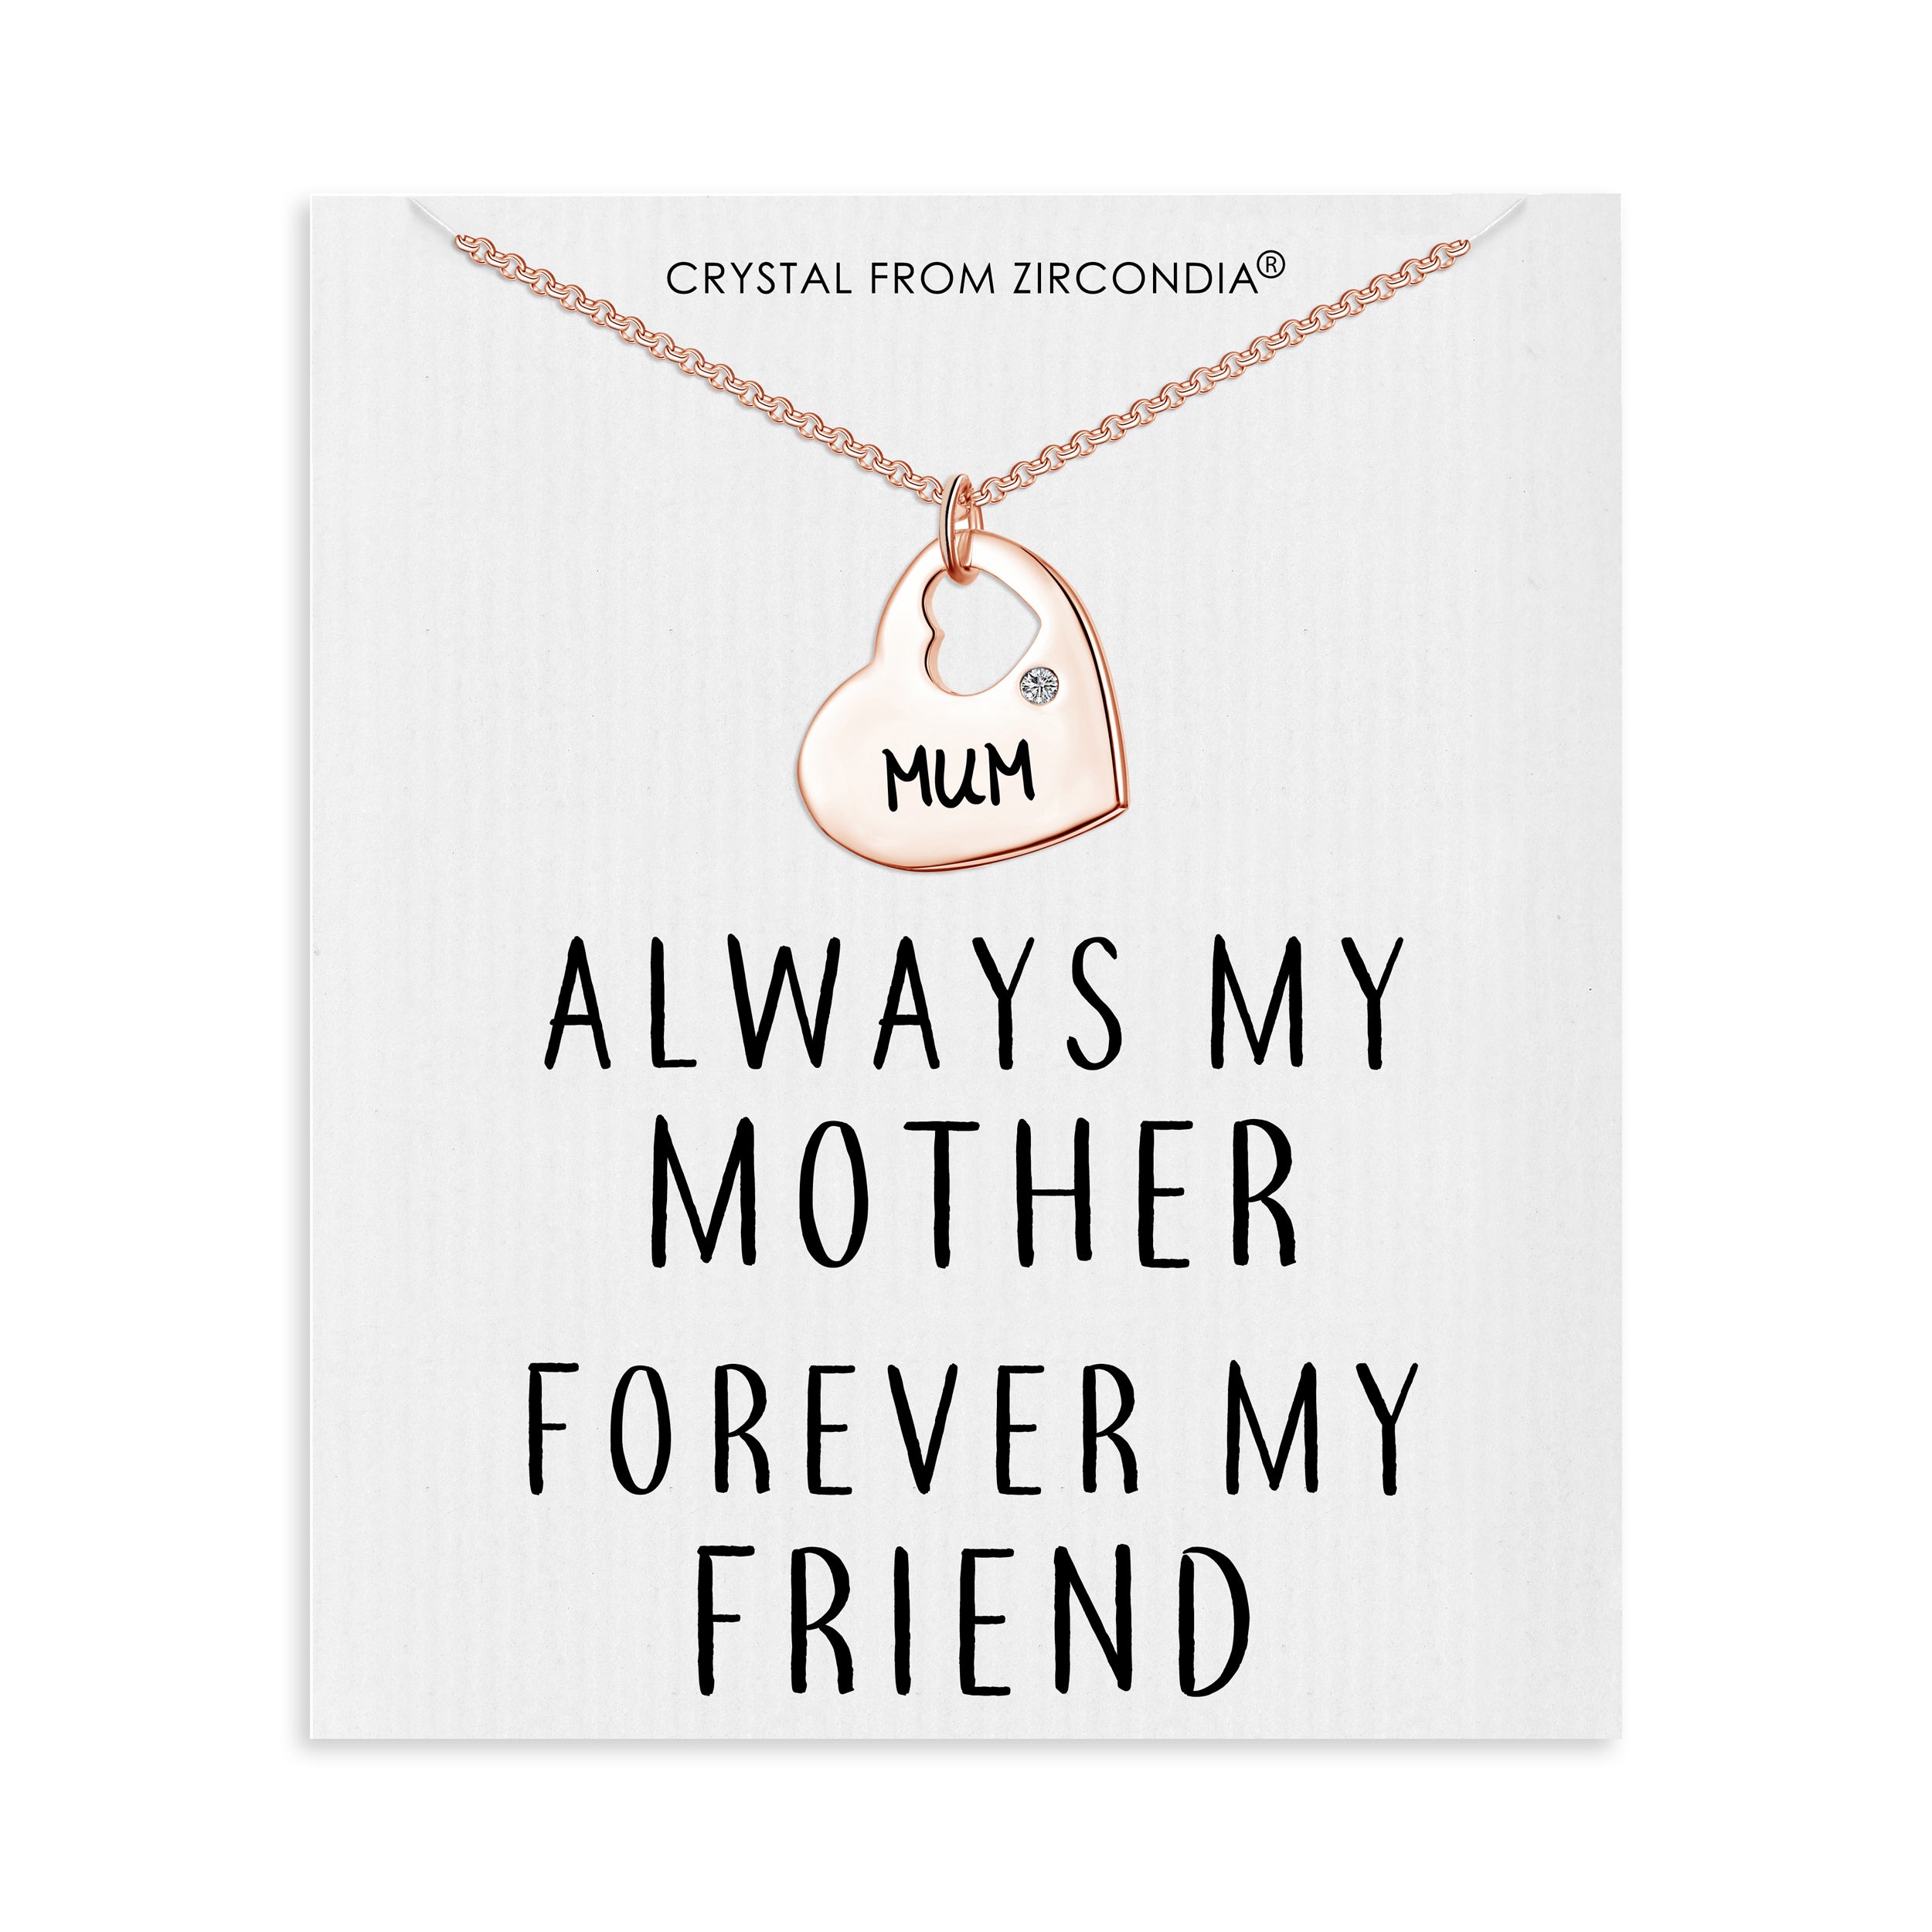 Rose Gold Plated Mum Heart Necklace with Quote Card Created with Zircondia® Crystals by Philip Jones Jewellery